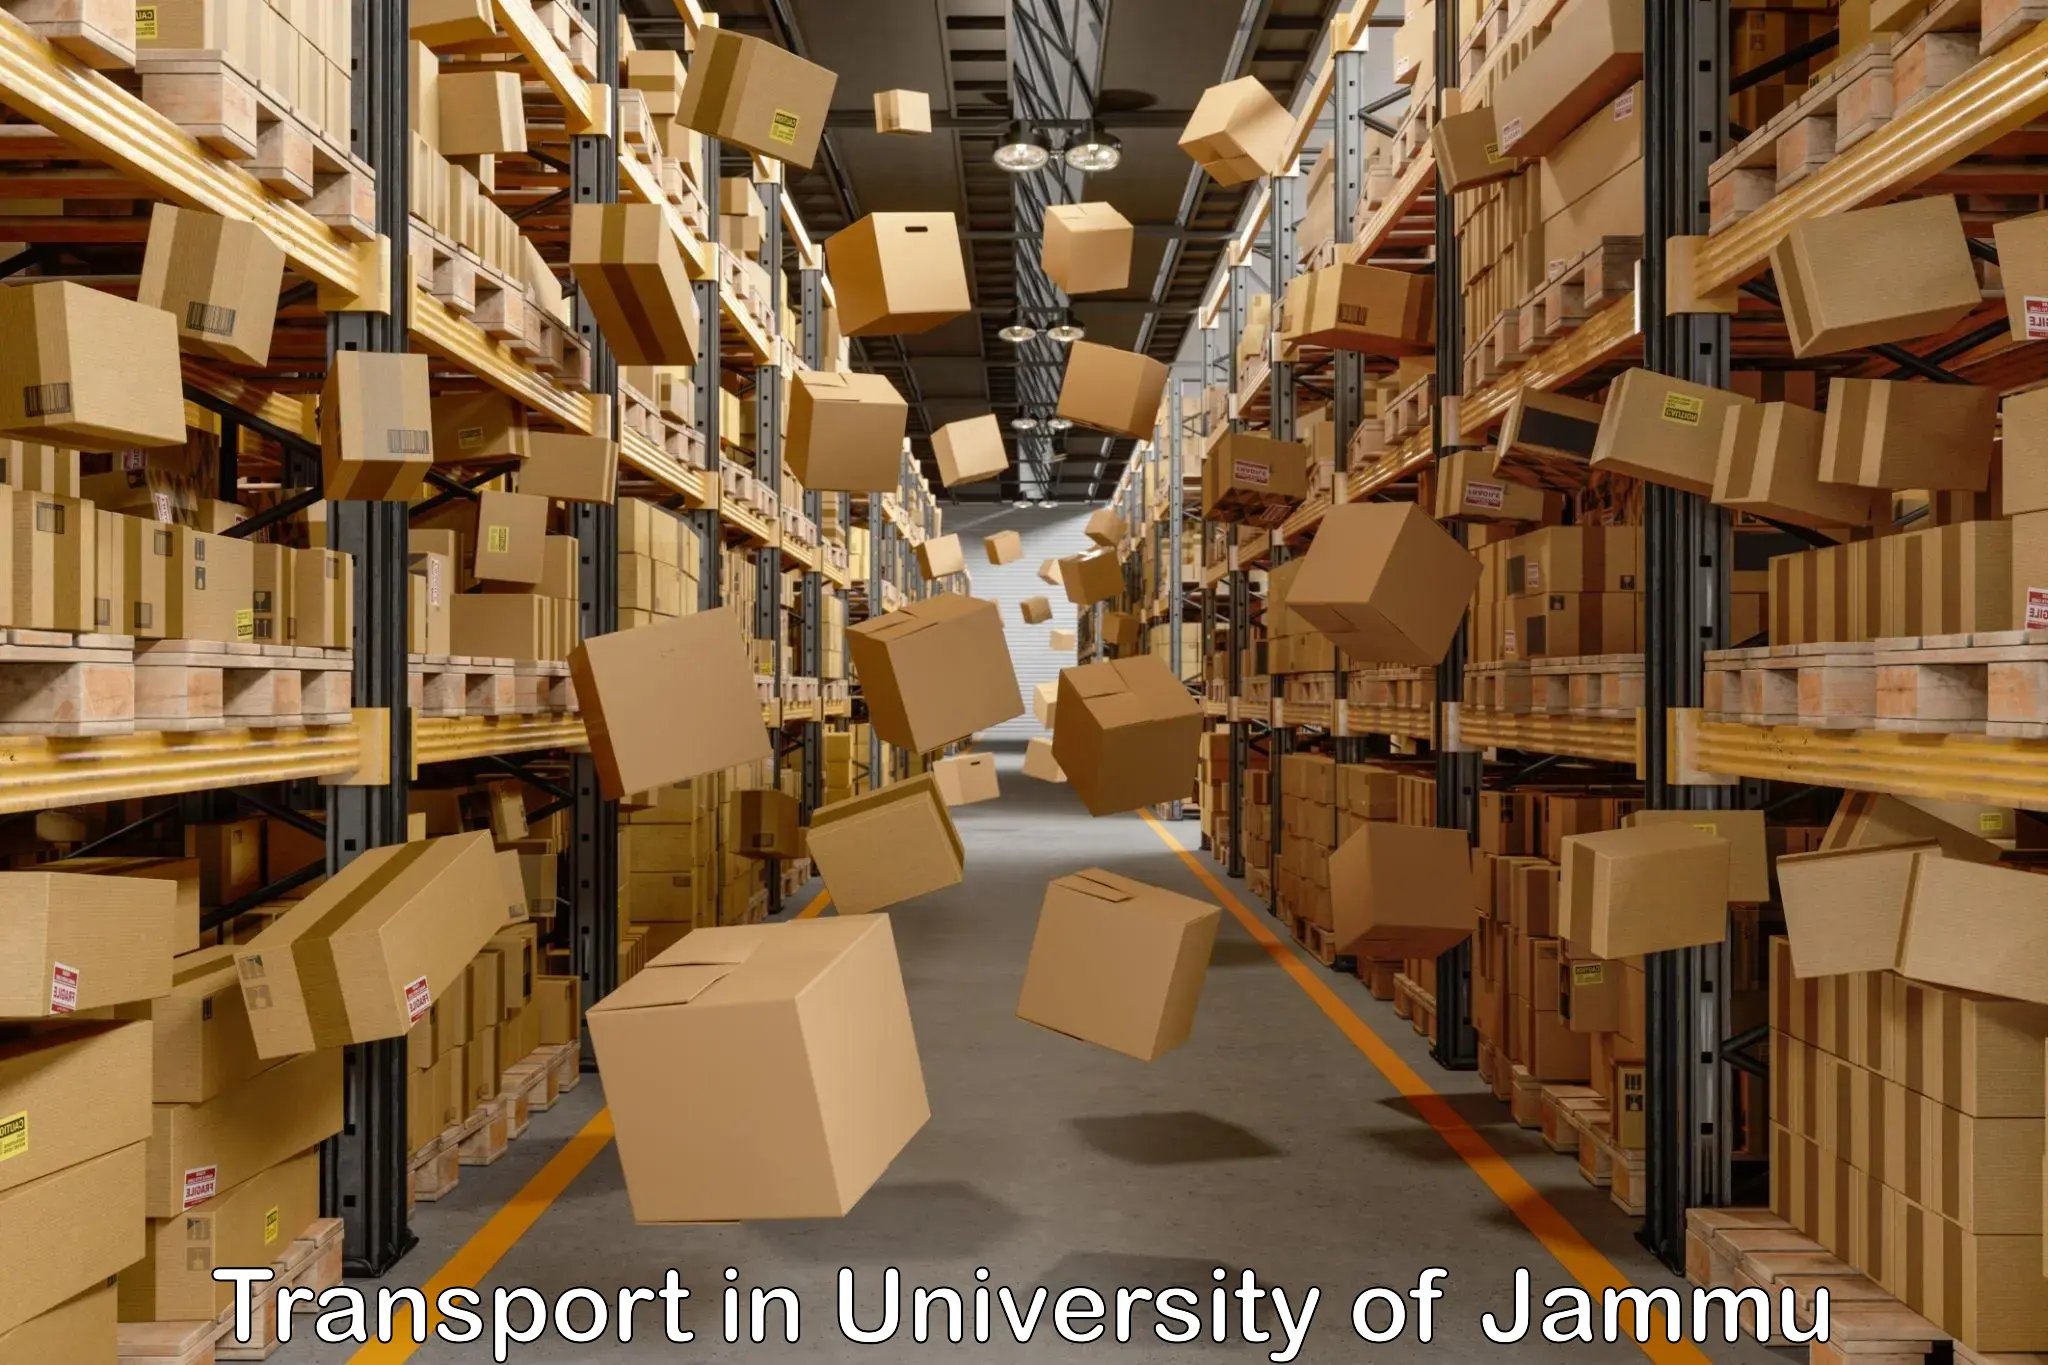 Vehicle transport services in University of Jammu